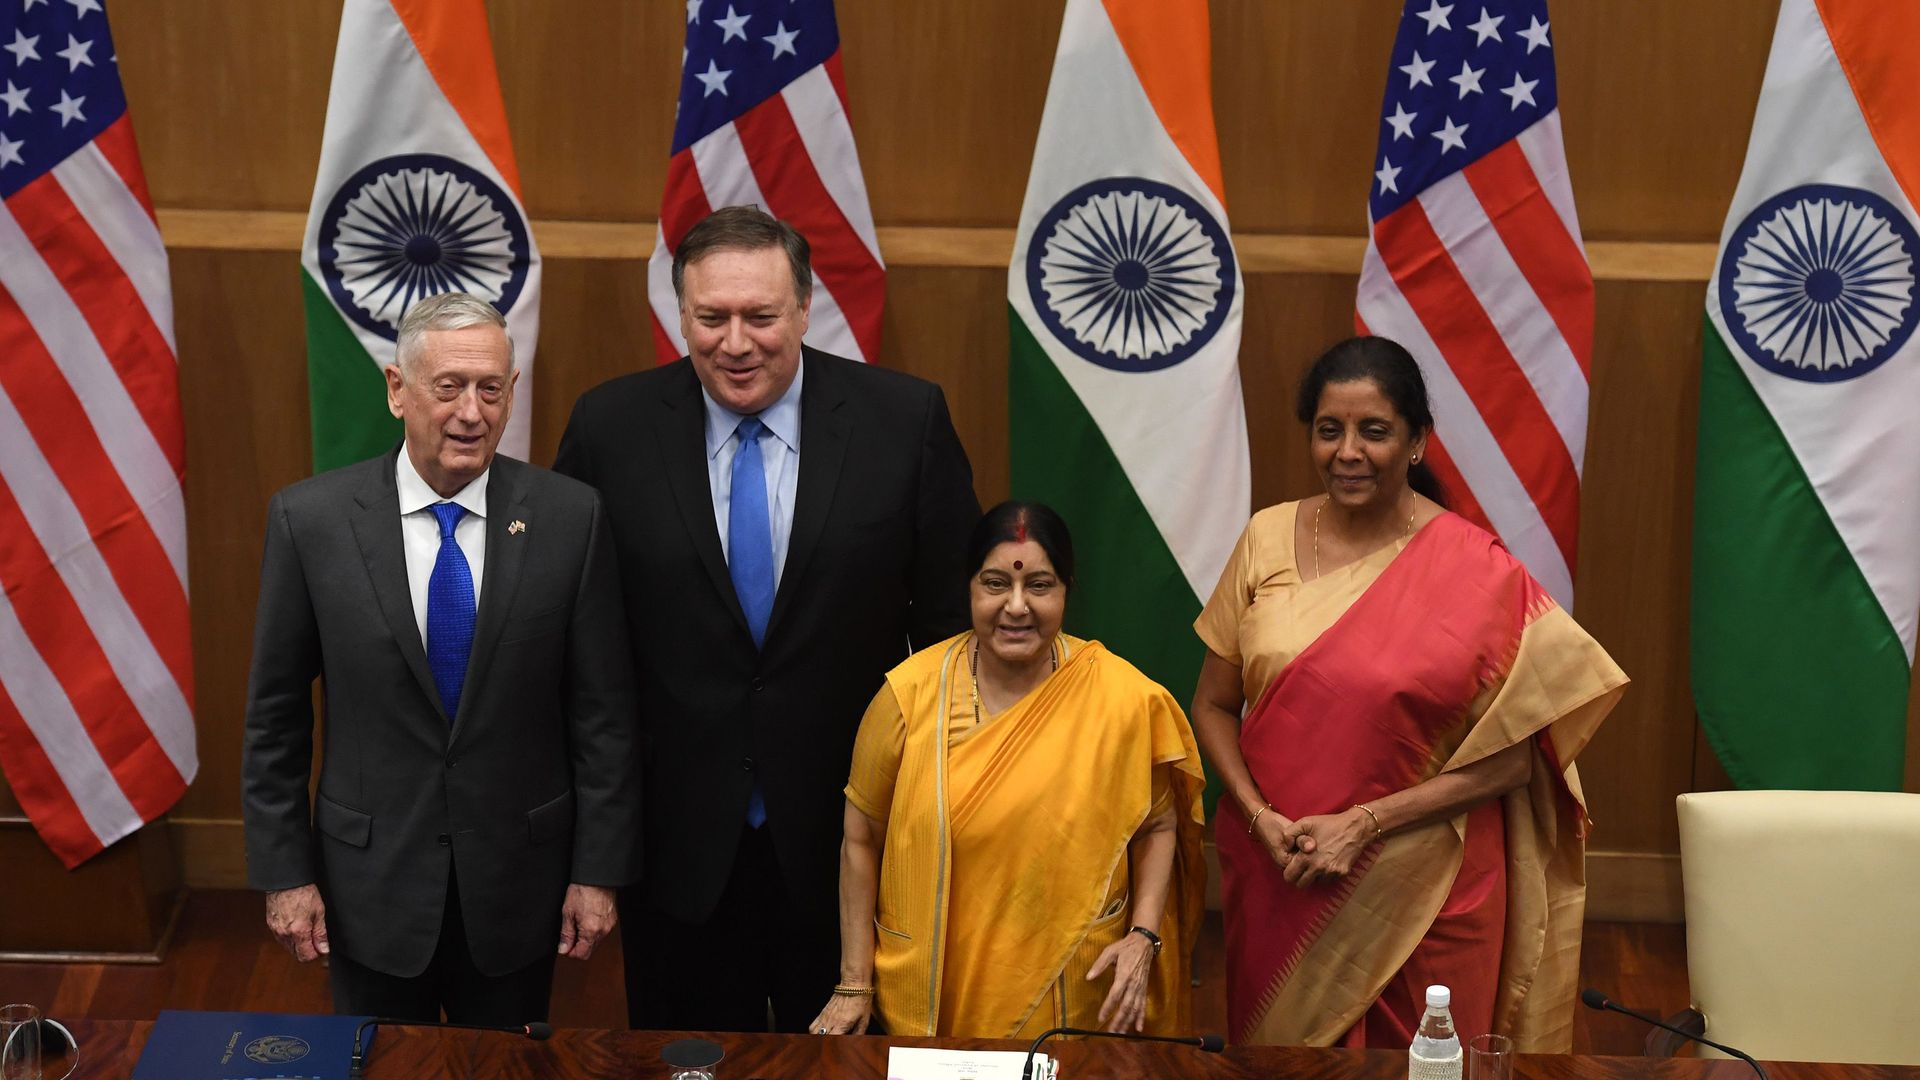 Mattis and Pompeo with their Indian counterparts at a press briefing